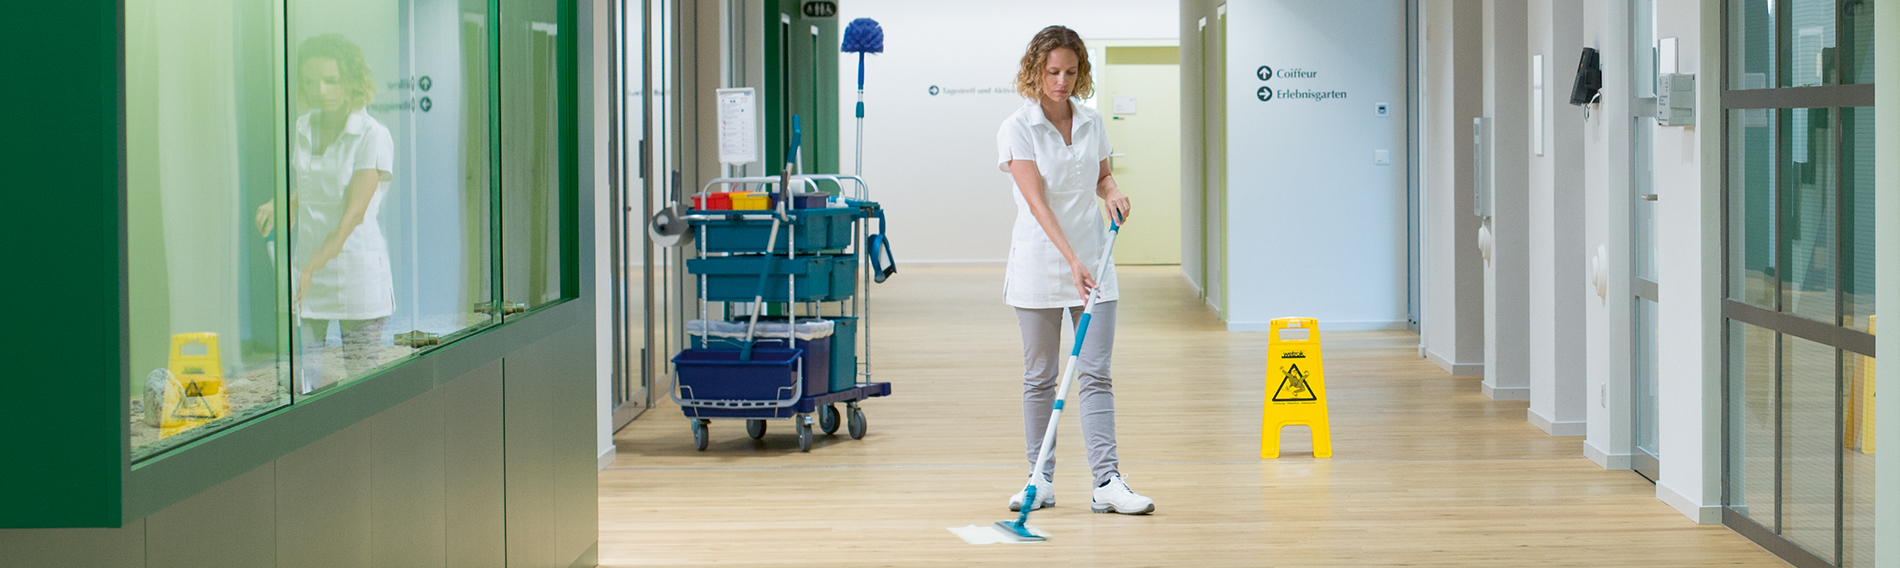 Adjusting the Handle on the Mopping Device Correctly